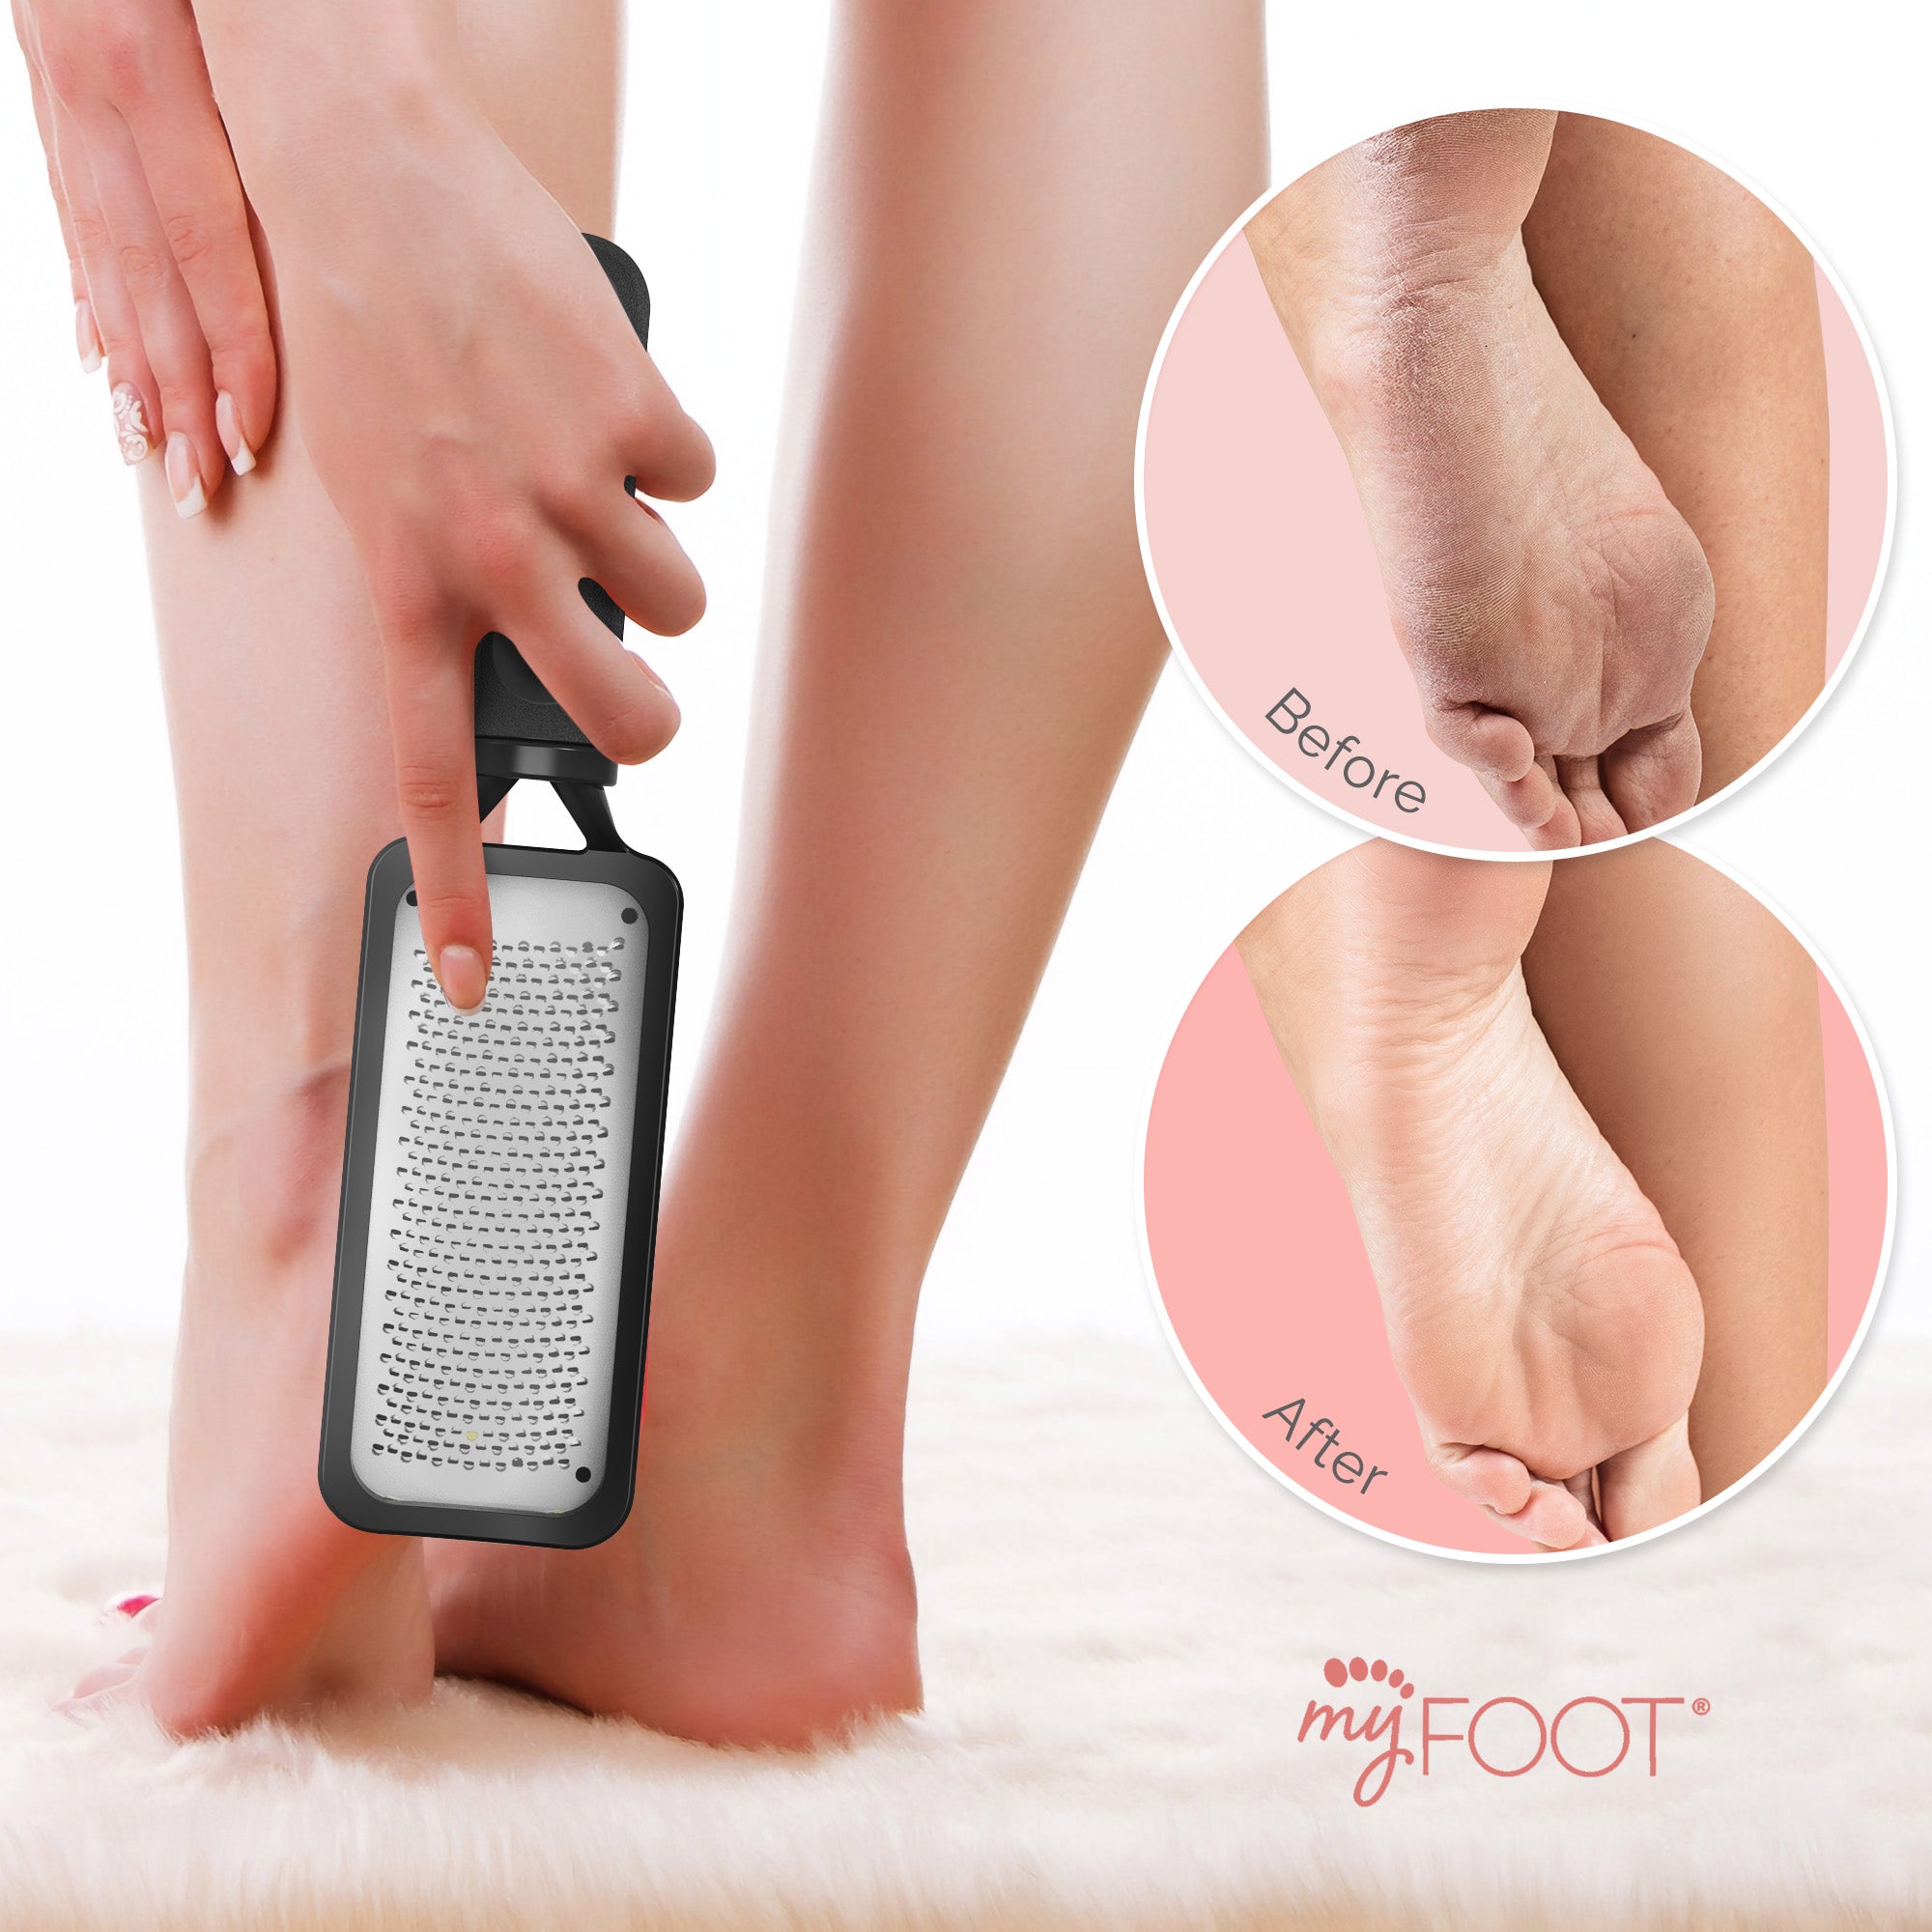 Foot File Rasp Callus Skin Remover Pedicure Tool for Cracked Rough